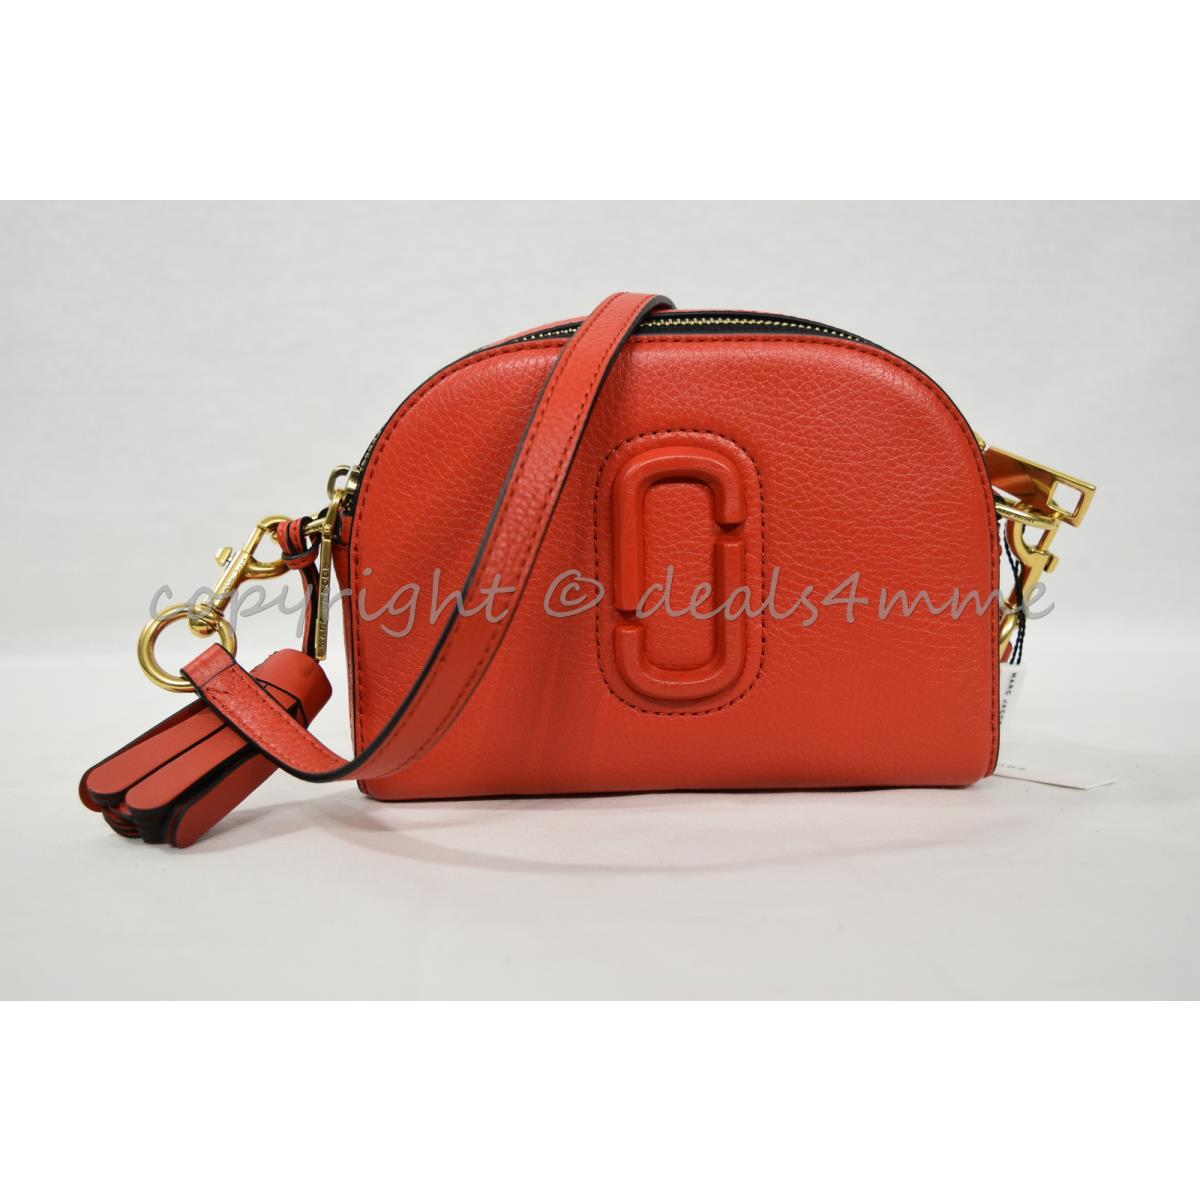 Marc By Marc Jacobs M0009474 Shutter Camera Shoulder/crossbody Bag in Lava Red